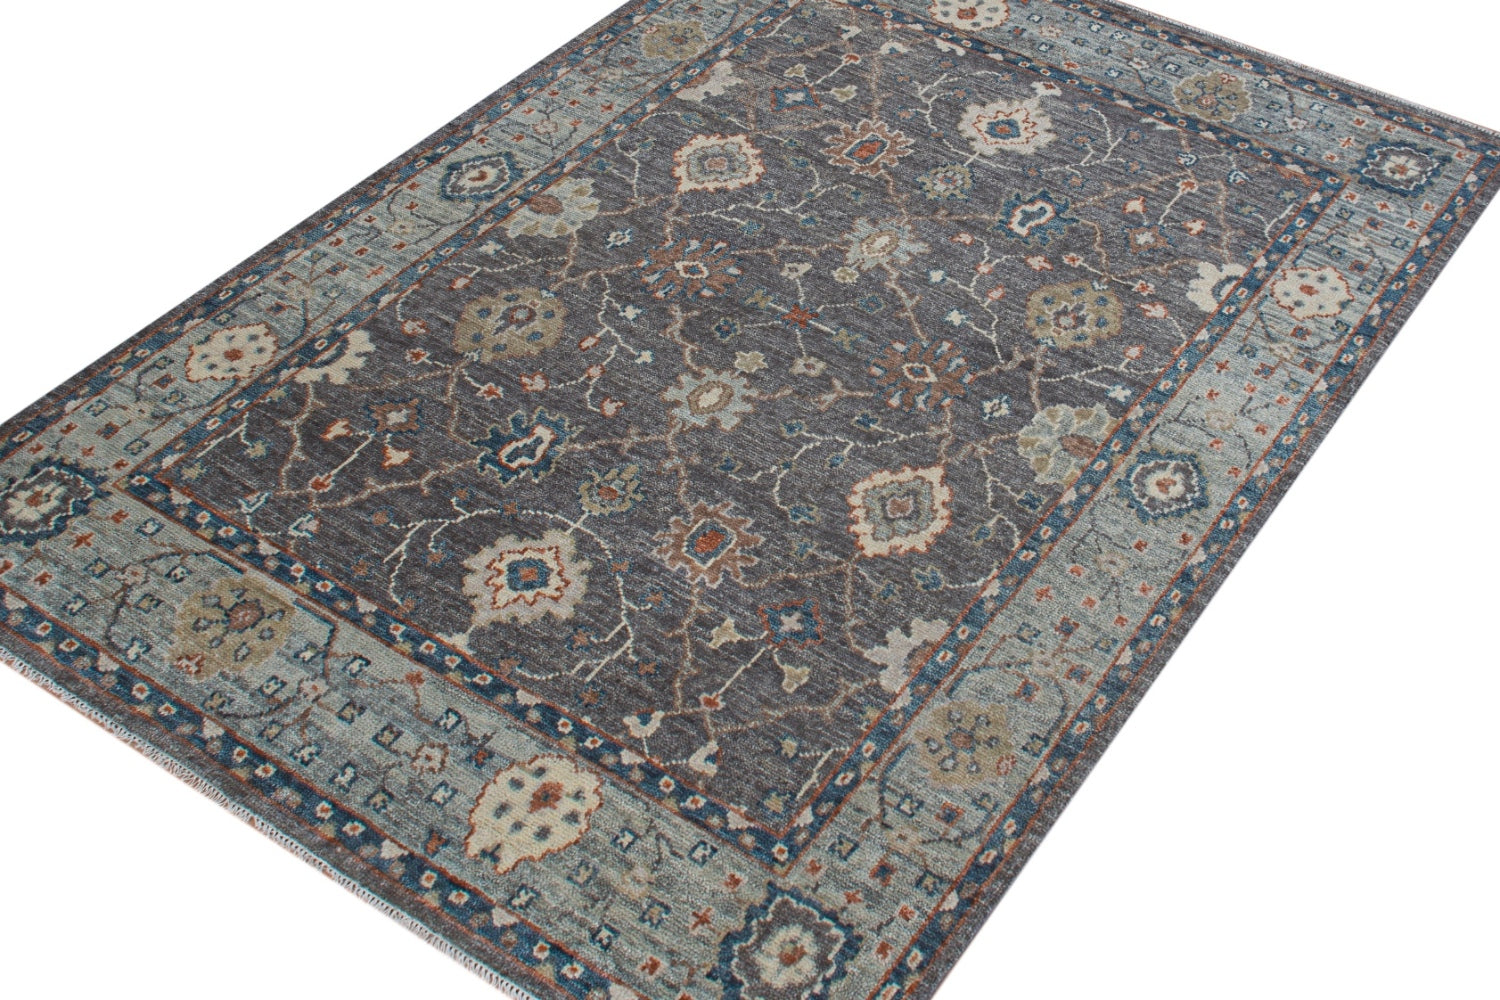 Sultanabad 3 Handwoven Traditional Rug, J71672